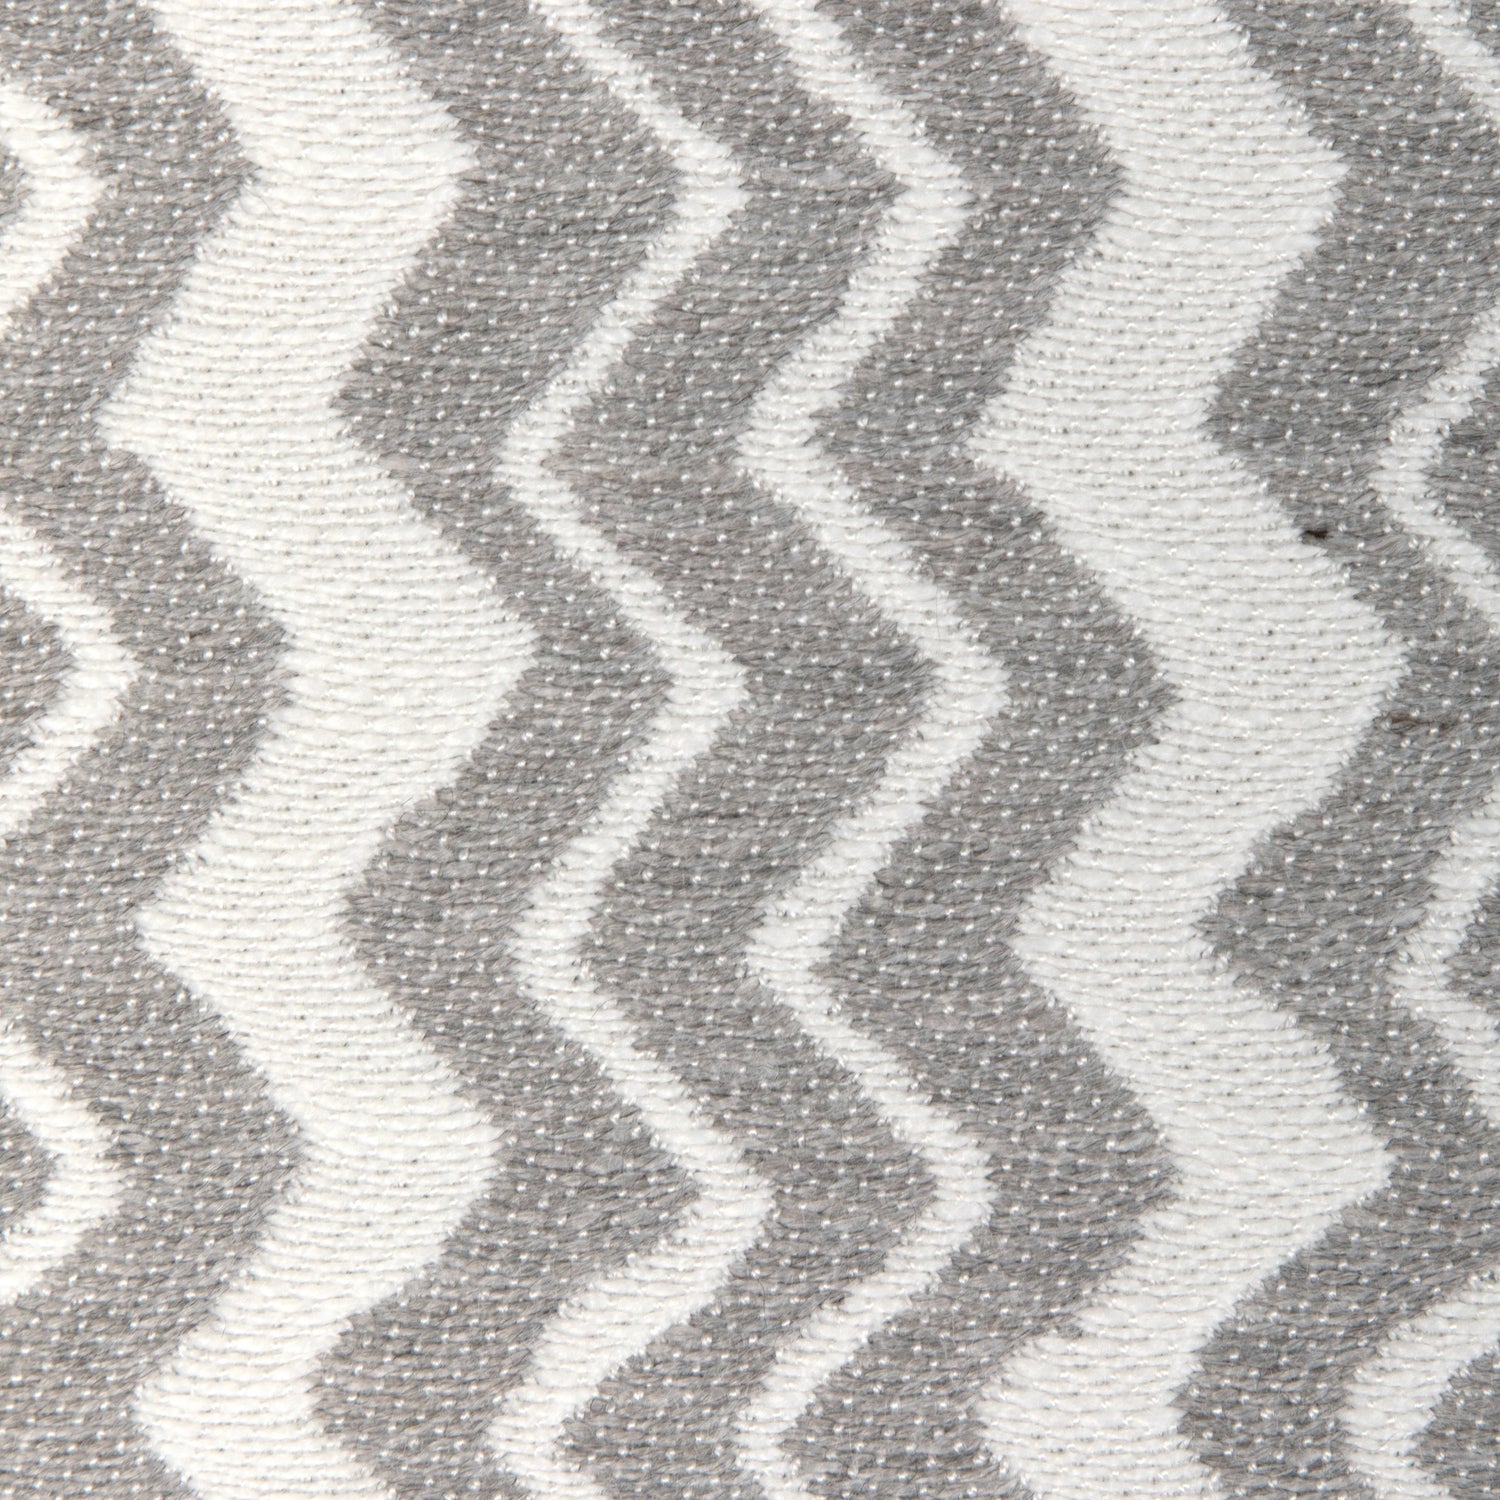 Closeup detail of Matipi fabric in driftwood color - pattern 36925.11.0 - by Kravet Couture in the Riviera collection